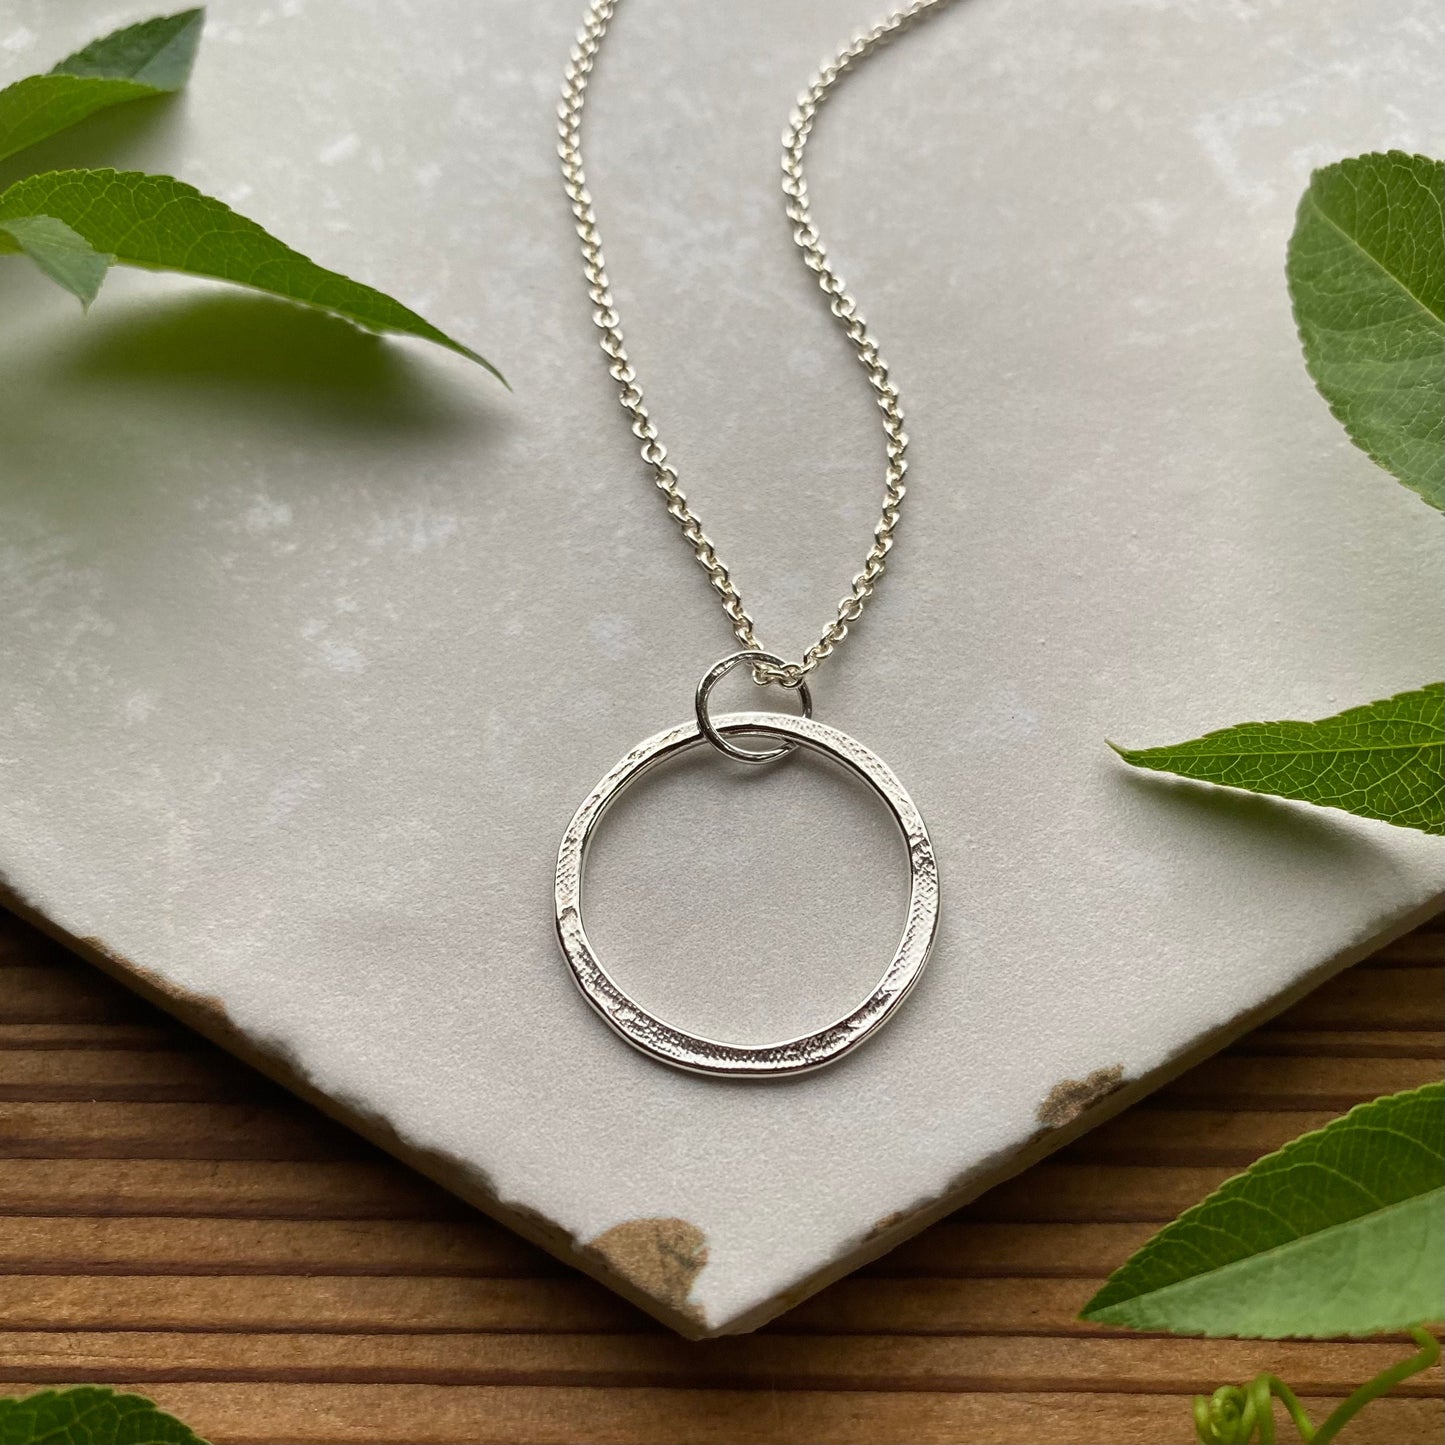 Rustic Hammered Sterling Silver Single Circle Handmade Pendant on Sterling Silver Cable Chain, Everyday Bohemian Elegance